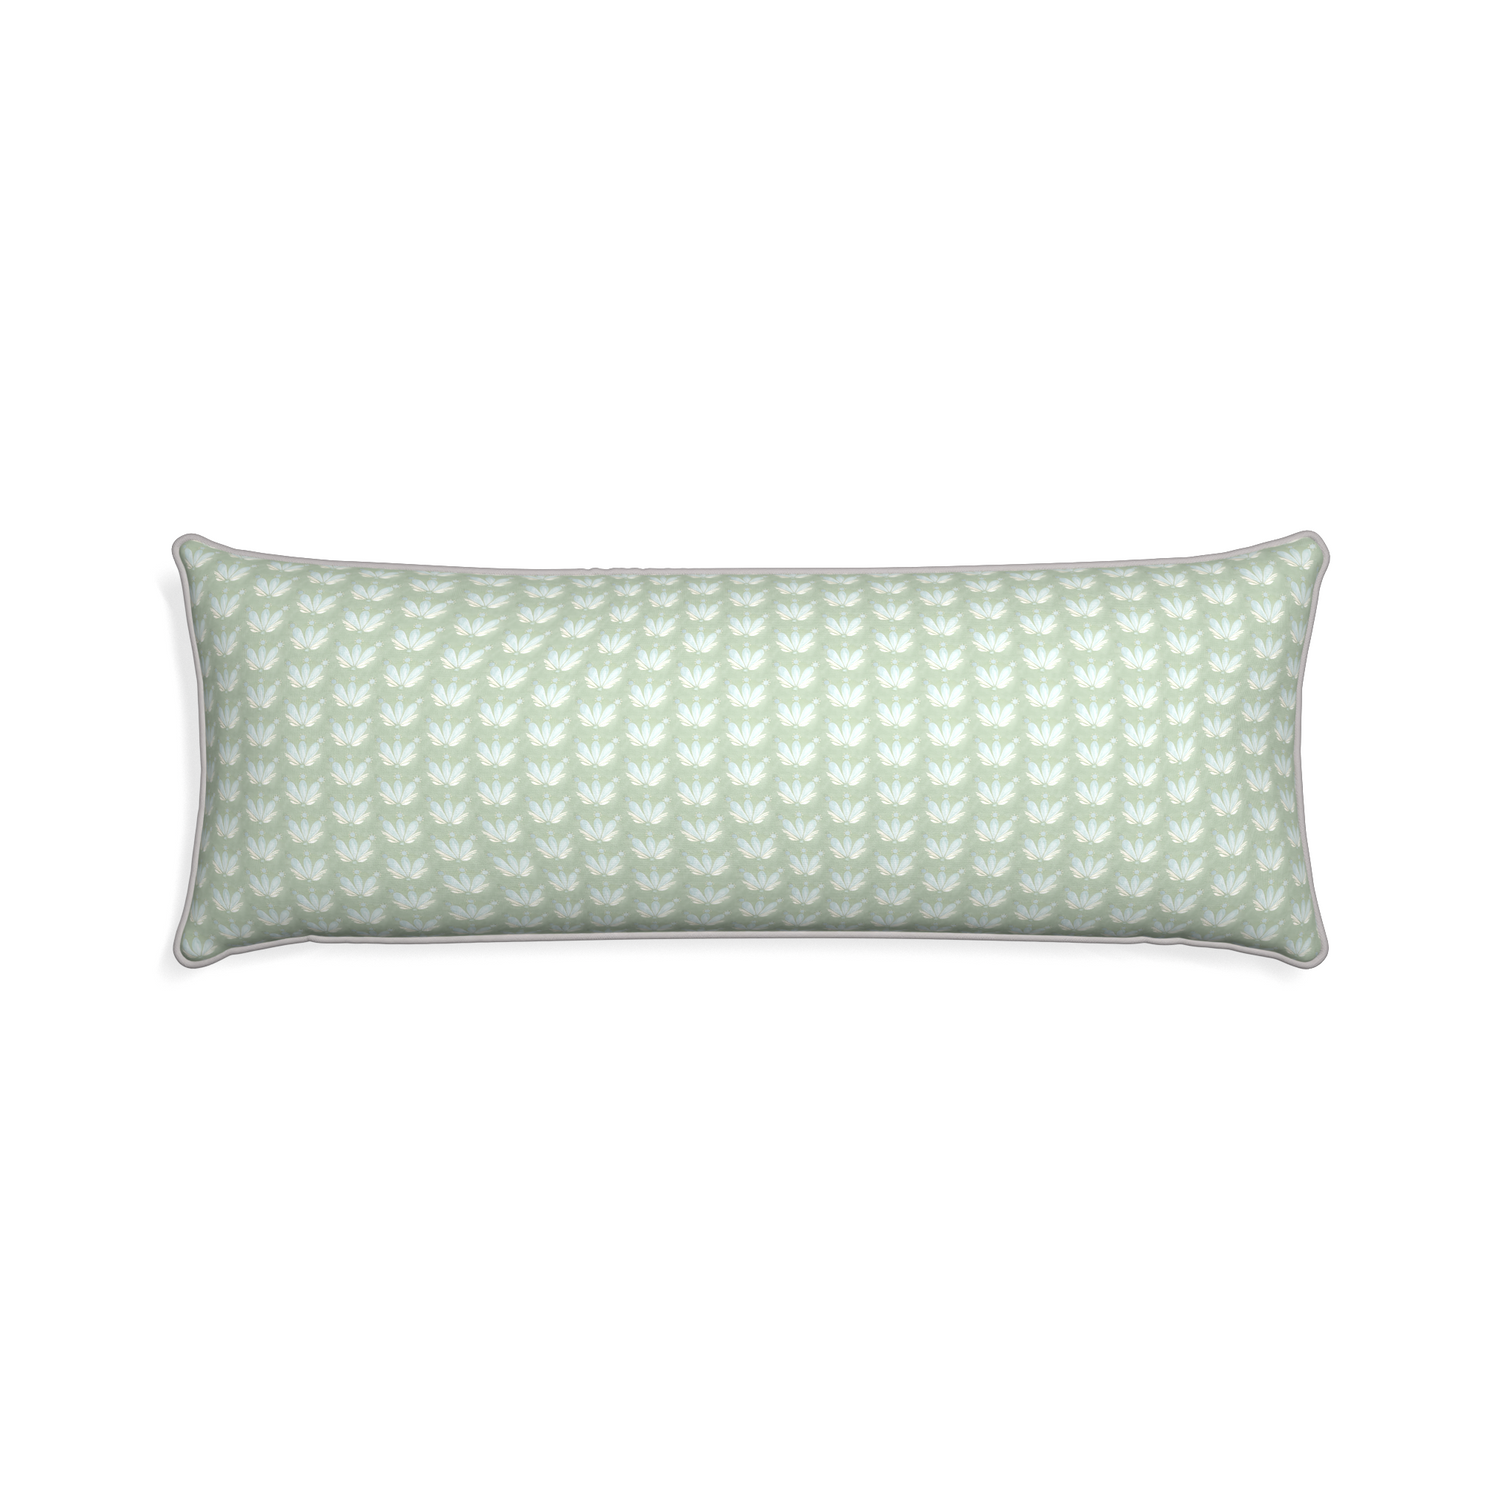 Xl-lumbar serena sea salt custom pillow with pebble piping on white background